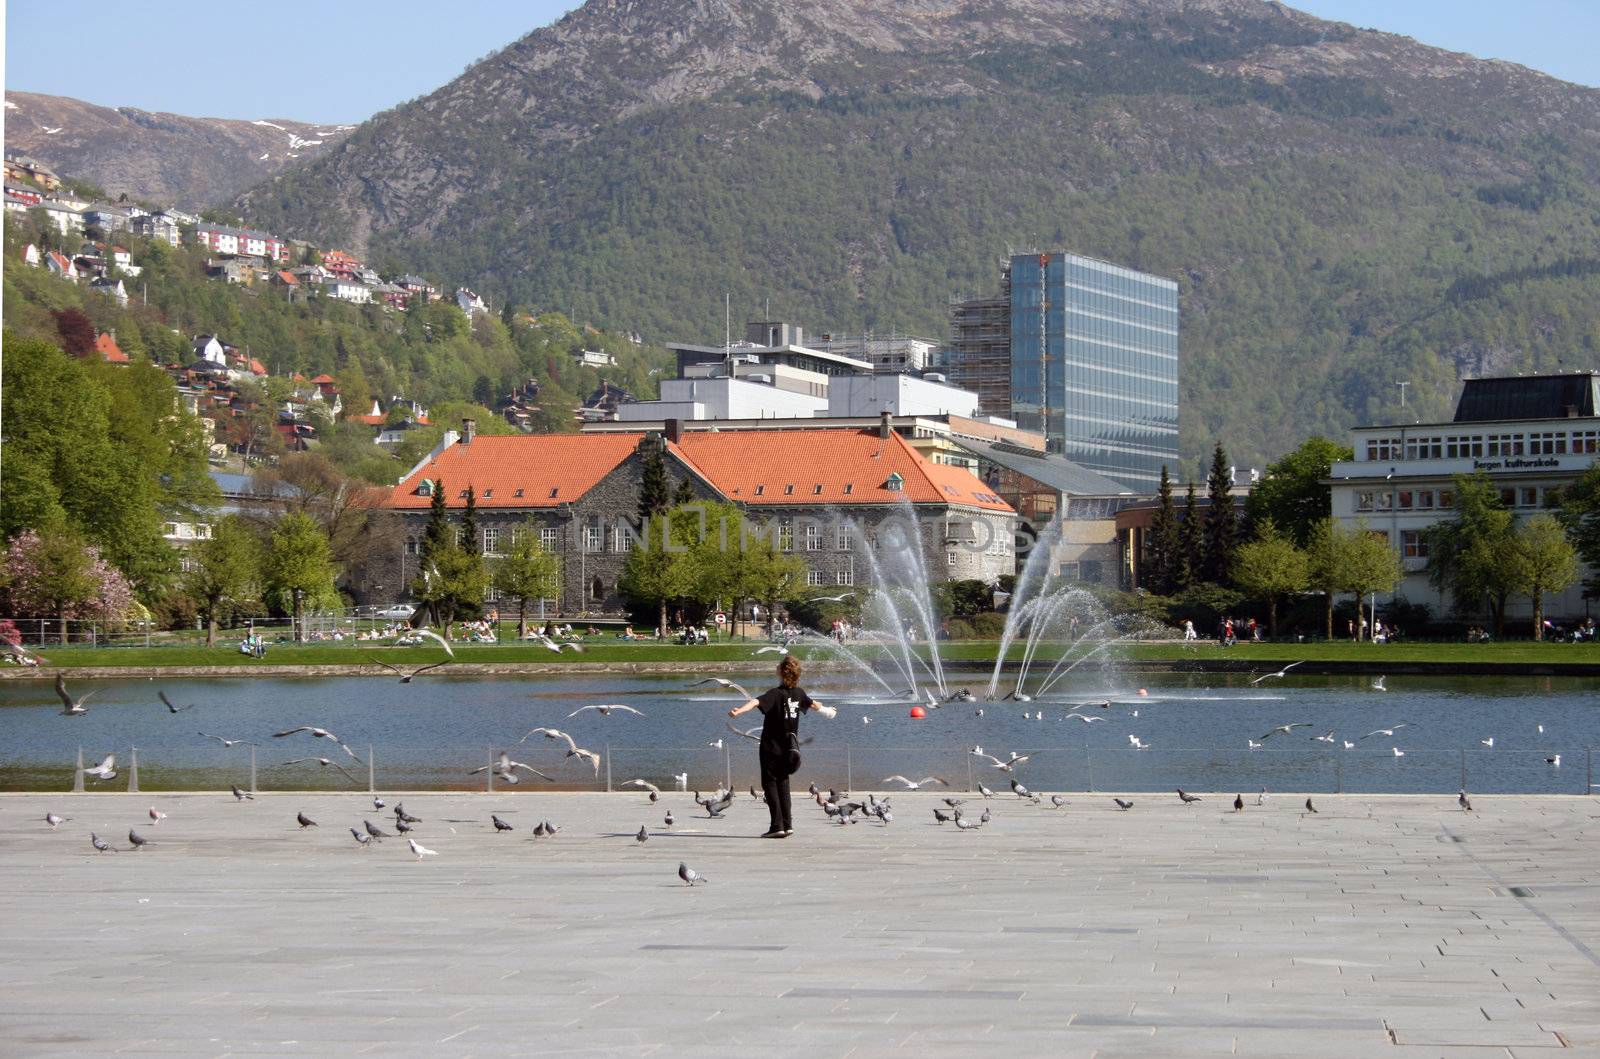 Lille Lundegaardsvannet in Bergen. A small artificial lake in the city centre. Fountain. View of the mountain Ulriken and the city library. 